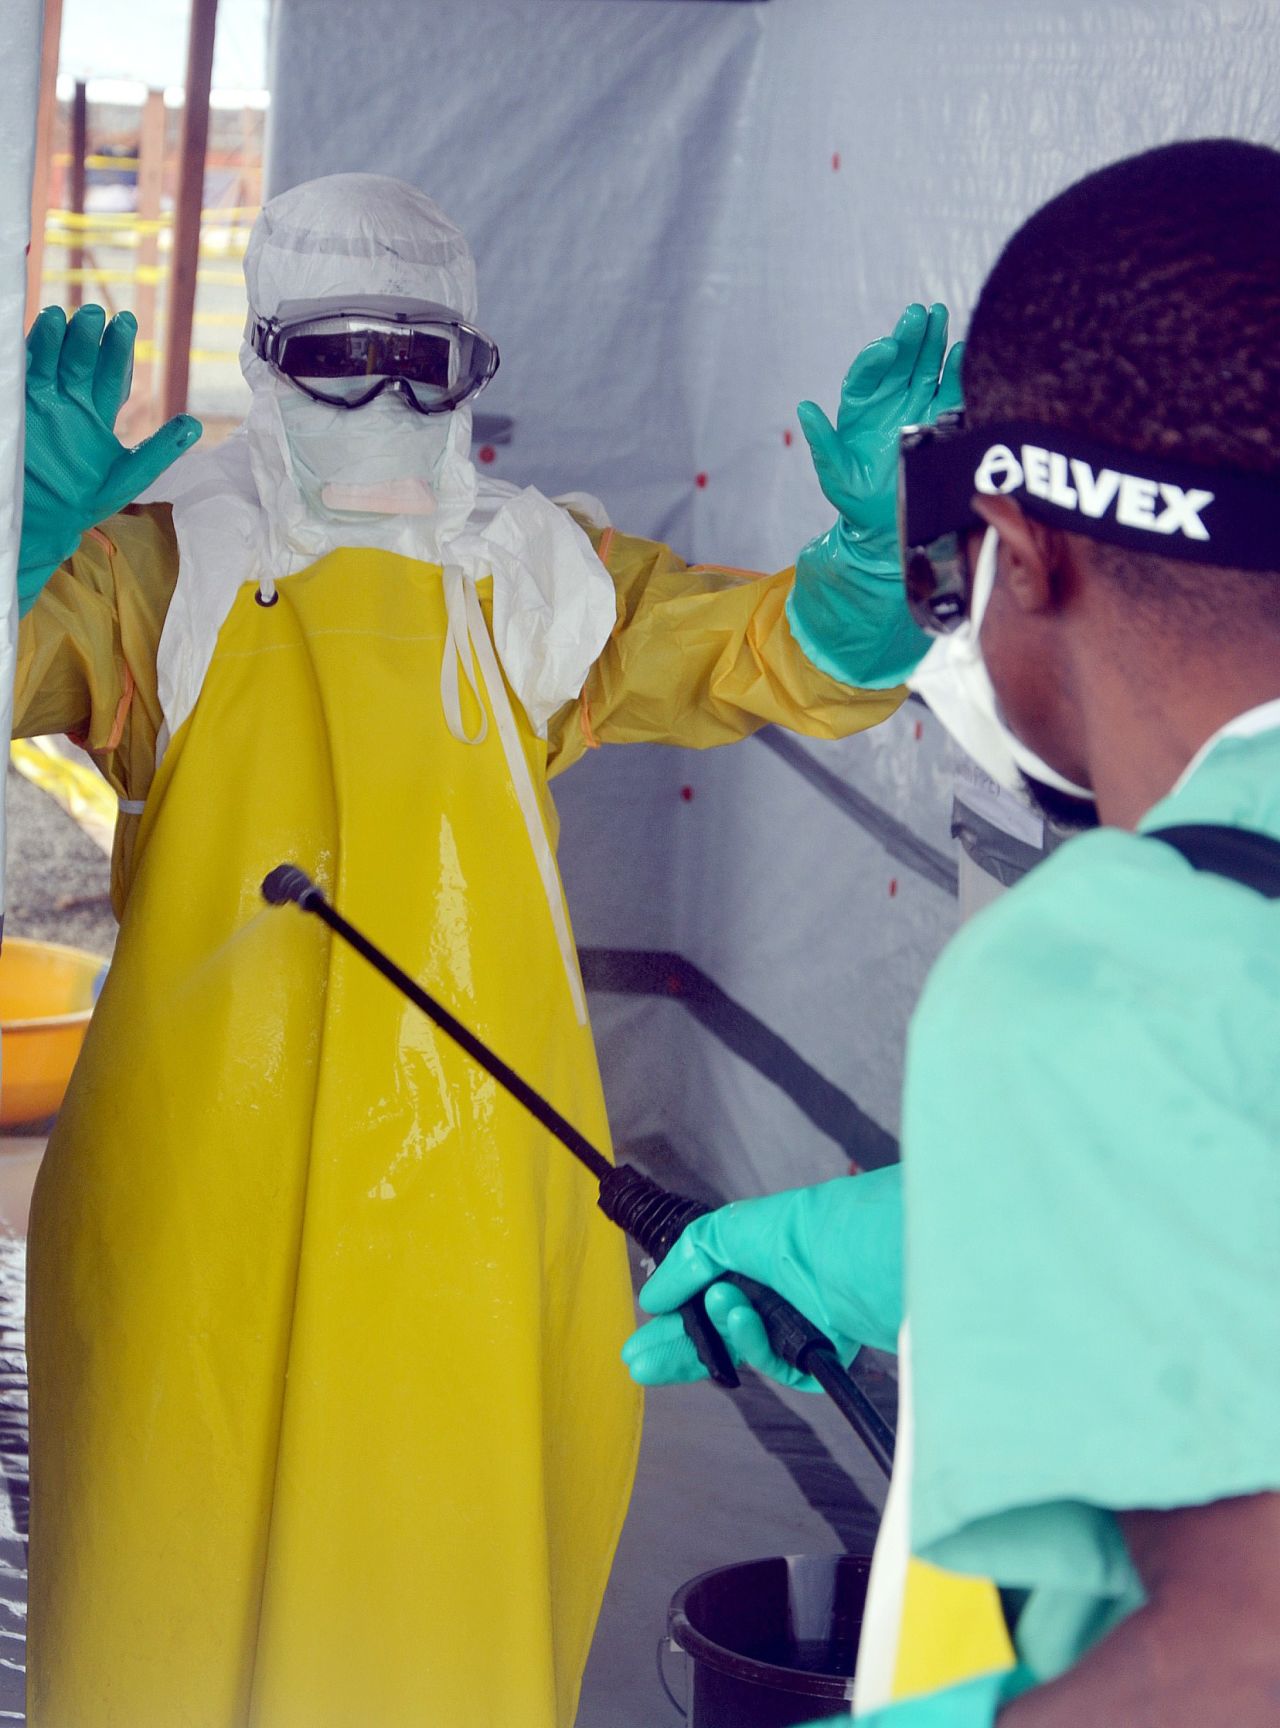 This picture from August shows a nurse disinfecting a doctor's protective gear at an Ebola hospital in Monrovia, Liberia. The fragile public health systems at the heart of the epidemic in Liberia, Sierra Leone and Guinea became Ebola's first mass casualty. They collapsed as hundreds of health care workers with limited protective gear got sick. As of March 29, there were 861 cases and 495 deaths among medical staff in the three West African countries.